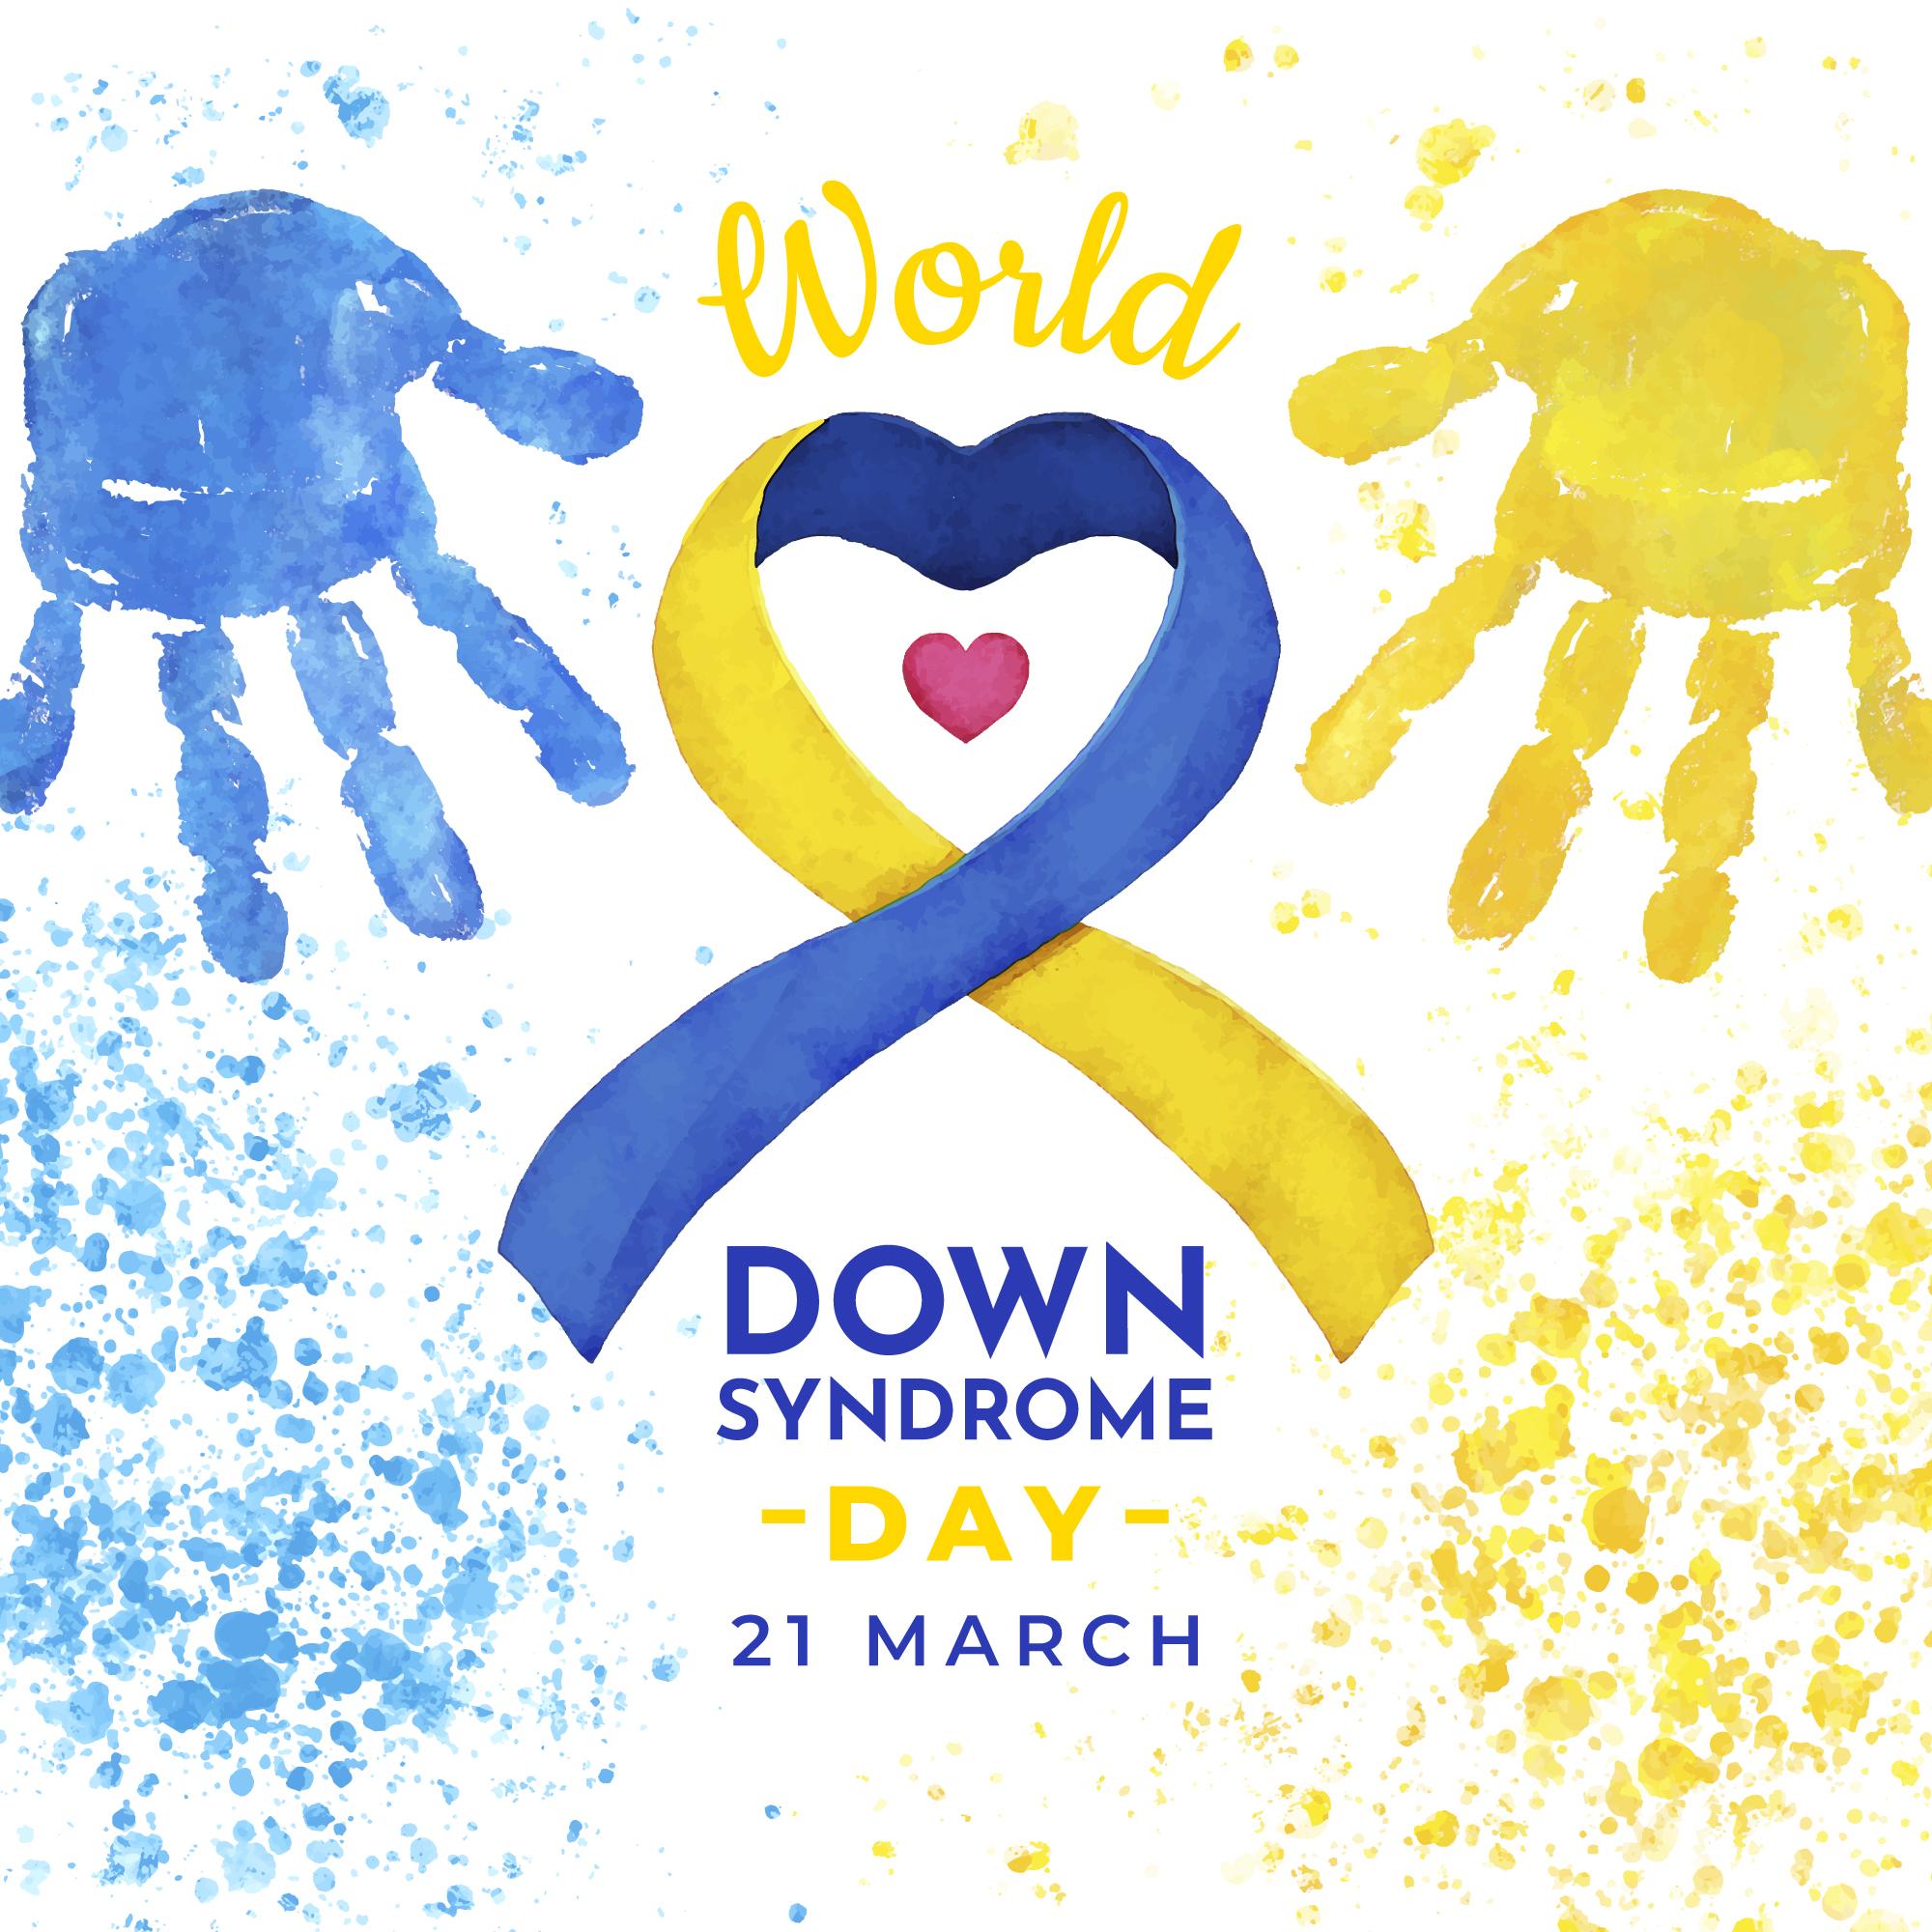 This image has the logo of the Down Syndrome which is a ribbon, blue on one side and yellow on the other side forming a loop and there is a tiny red heart in the loop. it also has 2 hands imprints facing down on the top corners one in yellow on the right side and blue on the left.  It has the text which says, World Down Syndrome Day, 21st March.